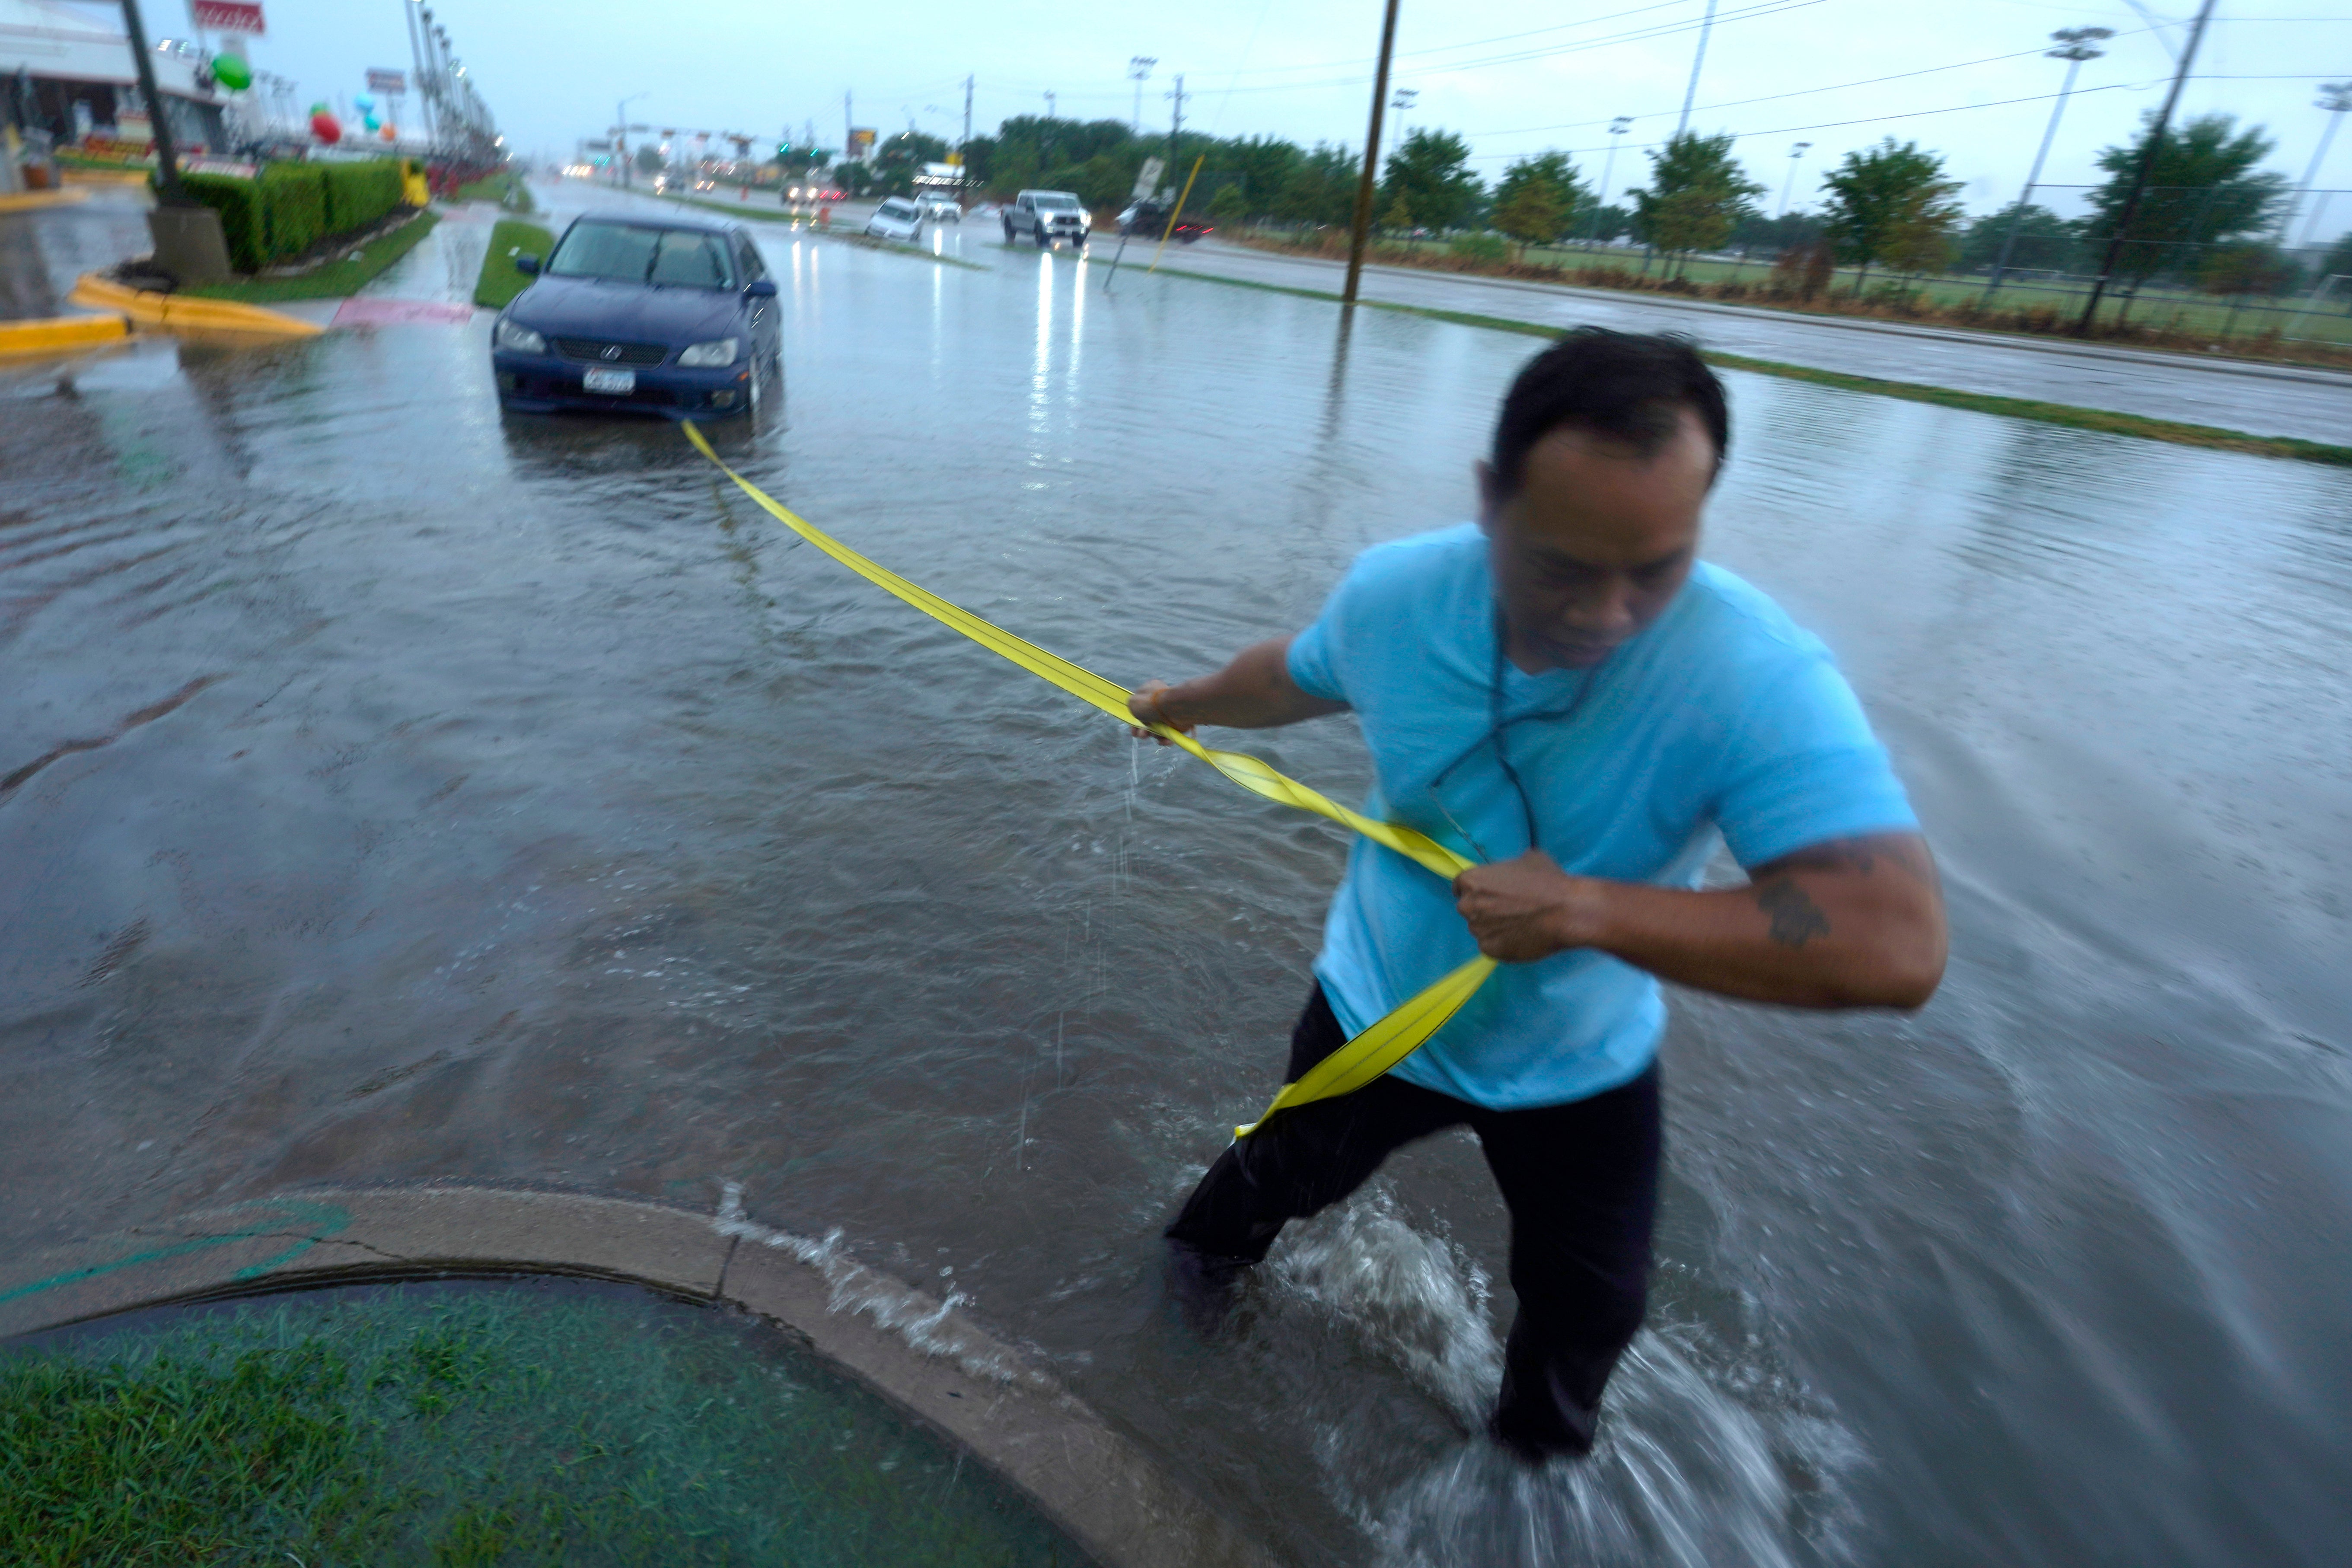 A man pulls his car out of floodwaters in Dallas, Texas on Monday